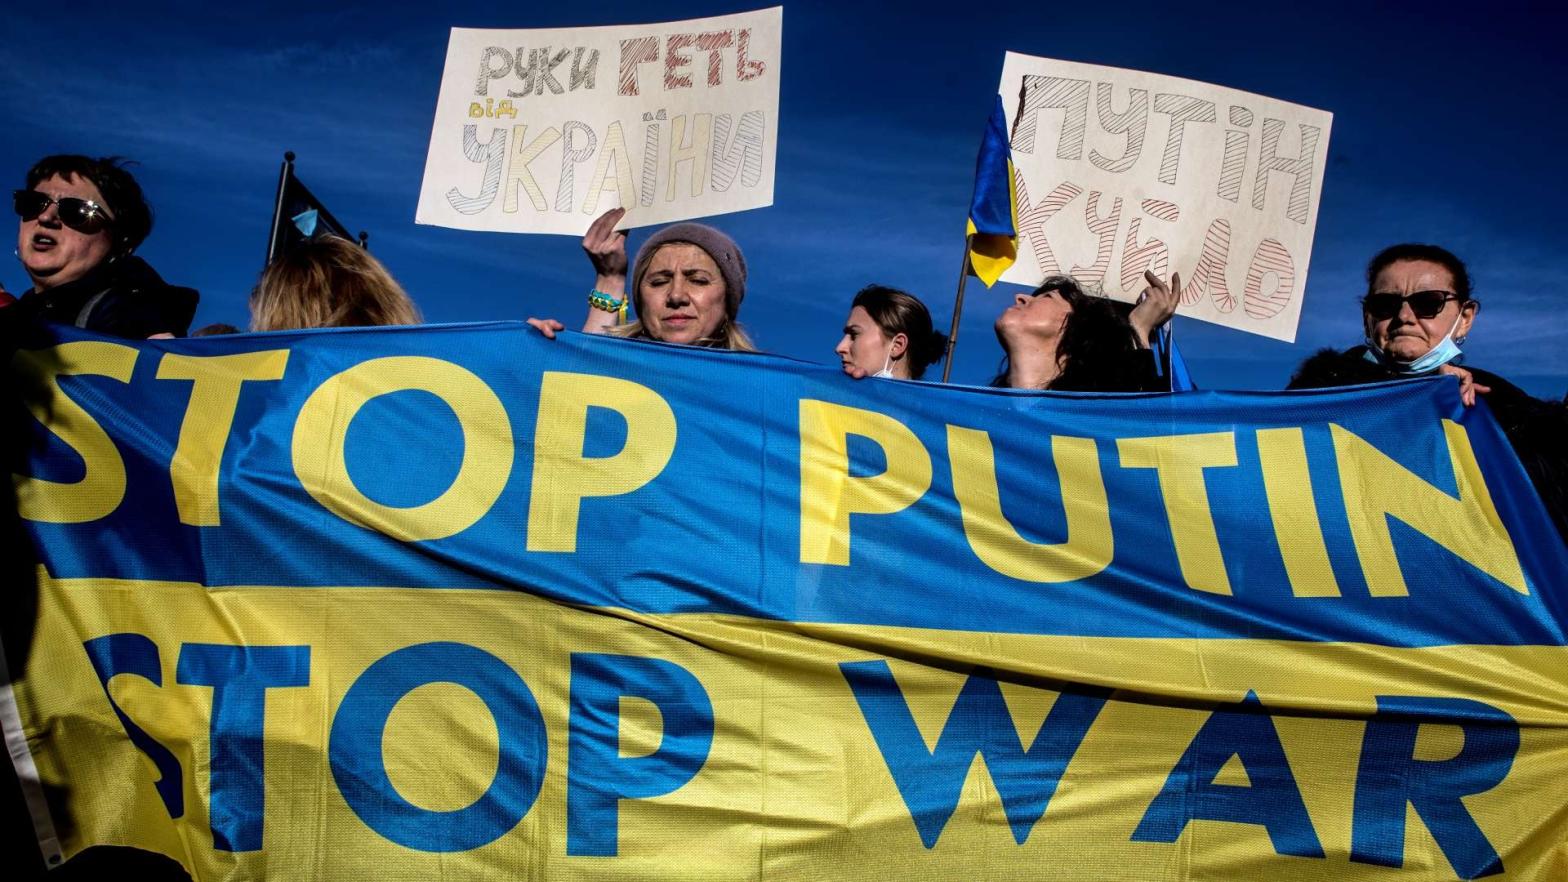 Protestors from the Christian Ukrainian Community of Rome hold banners in support of Ukraine following Russia's invasion. (Photo: Alessandra Benedetti-Corbis, Getty Images)